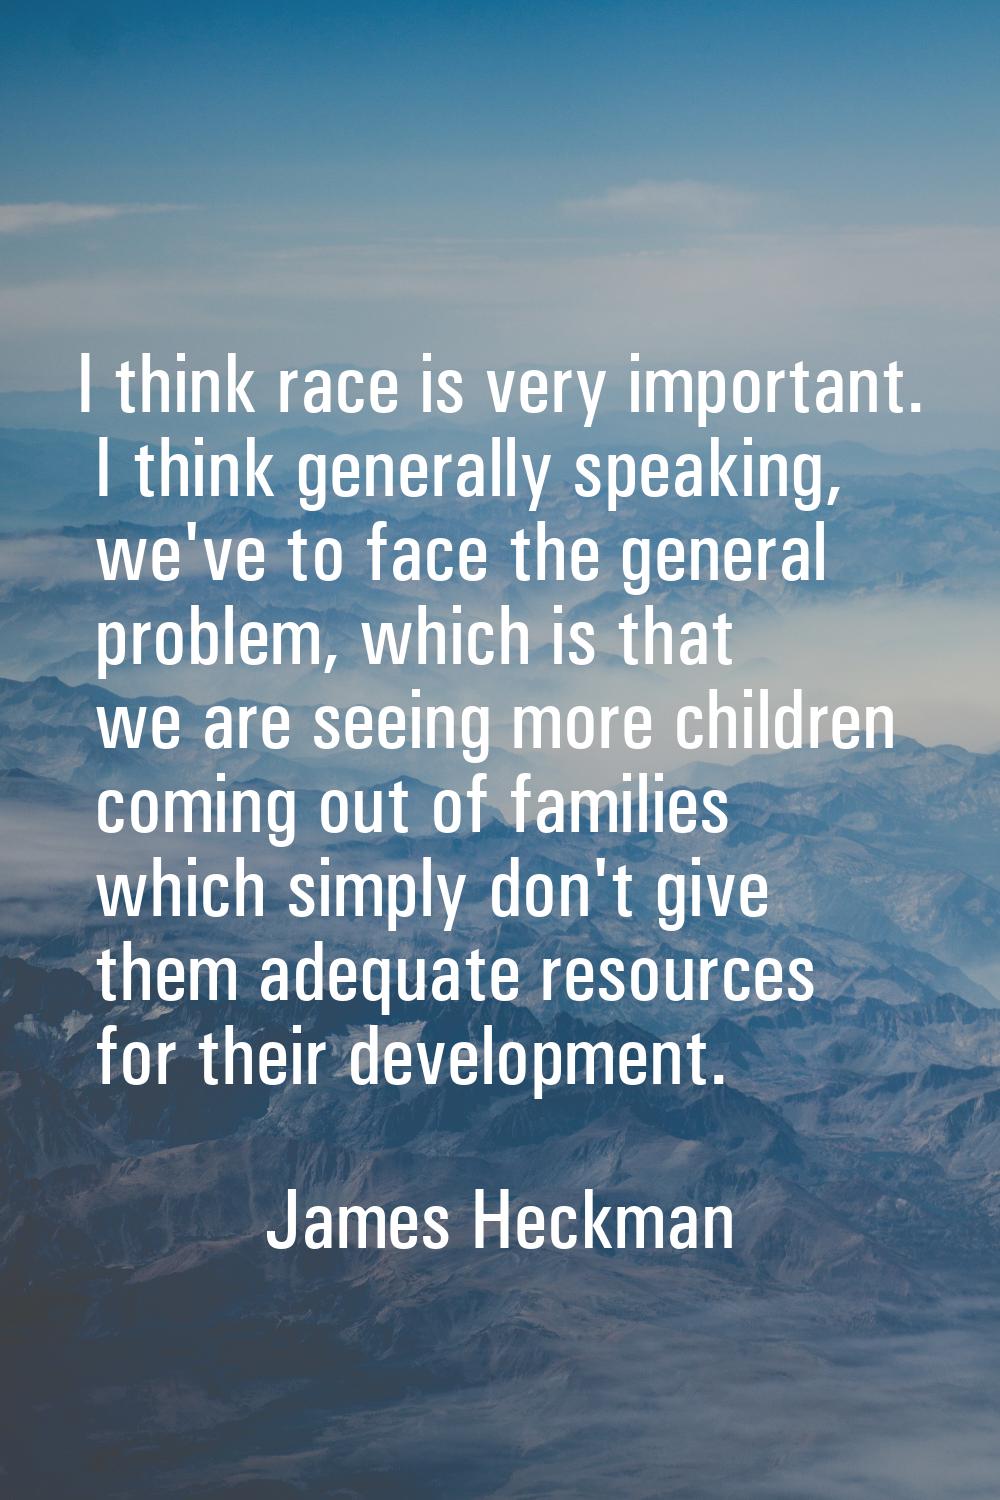 I think race is very important. I think generally speaking, we've to face the general problem, whic